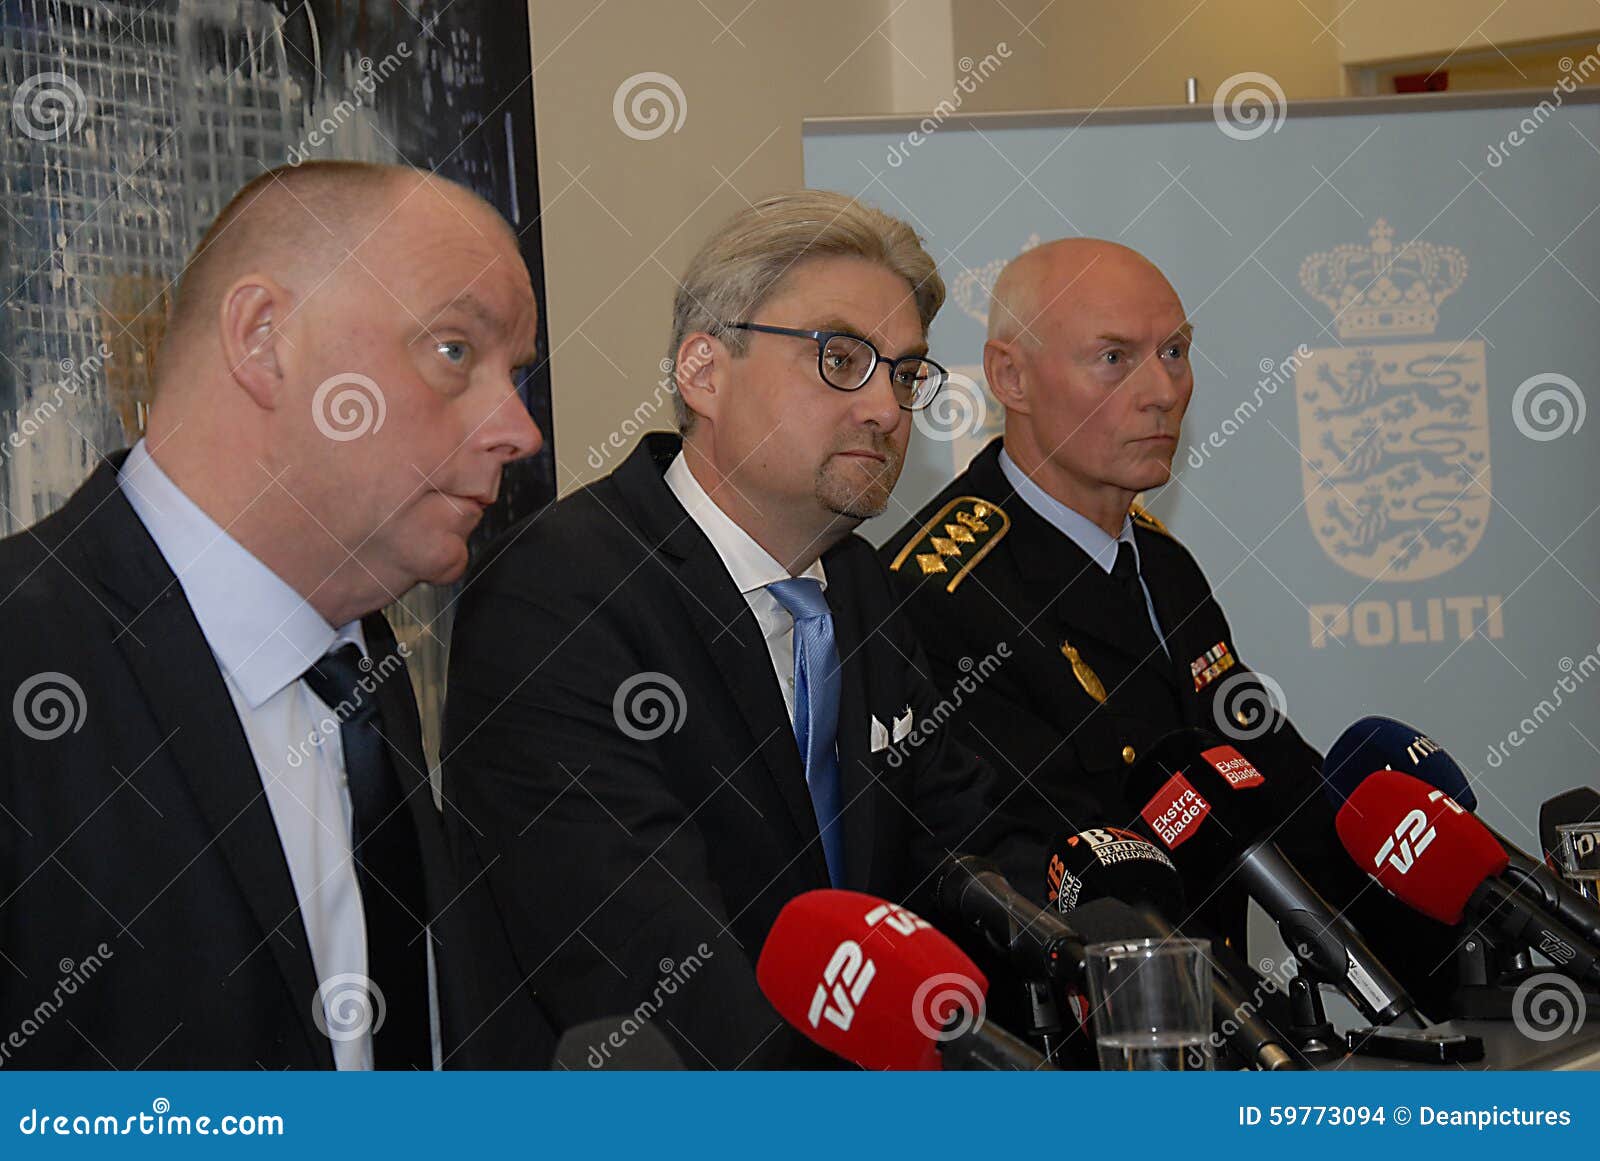 JOINT PRESS CONFERENCE REGARDING DNISH SECURITY. Copenhagen/Denmark/ 22th September 2015_ Danish Minister for justice Soren Pind in center on his left Jens Henrik Hojbjerg police comssioner for national police (Rigspolitichef) and on his right Finn Borch Andersen from PET acting boss for danish sepcial security police hold joint press conference regarding danish security and danish refugees situation in denmarks borders iat polce office